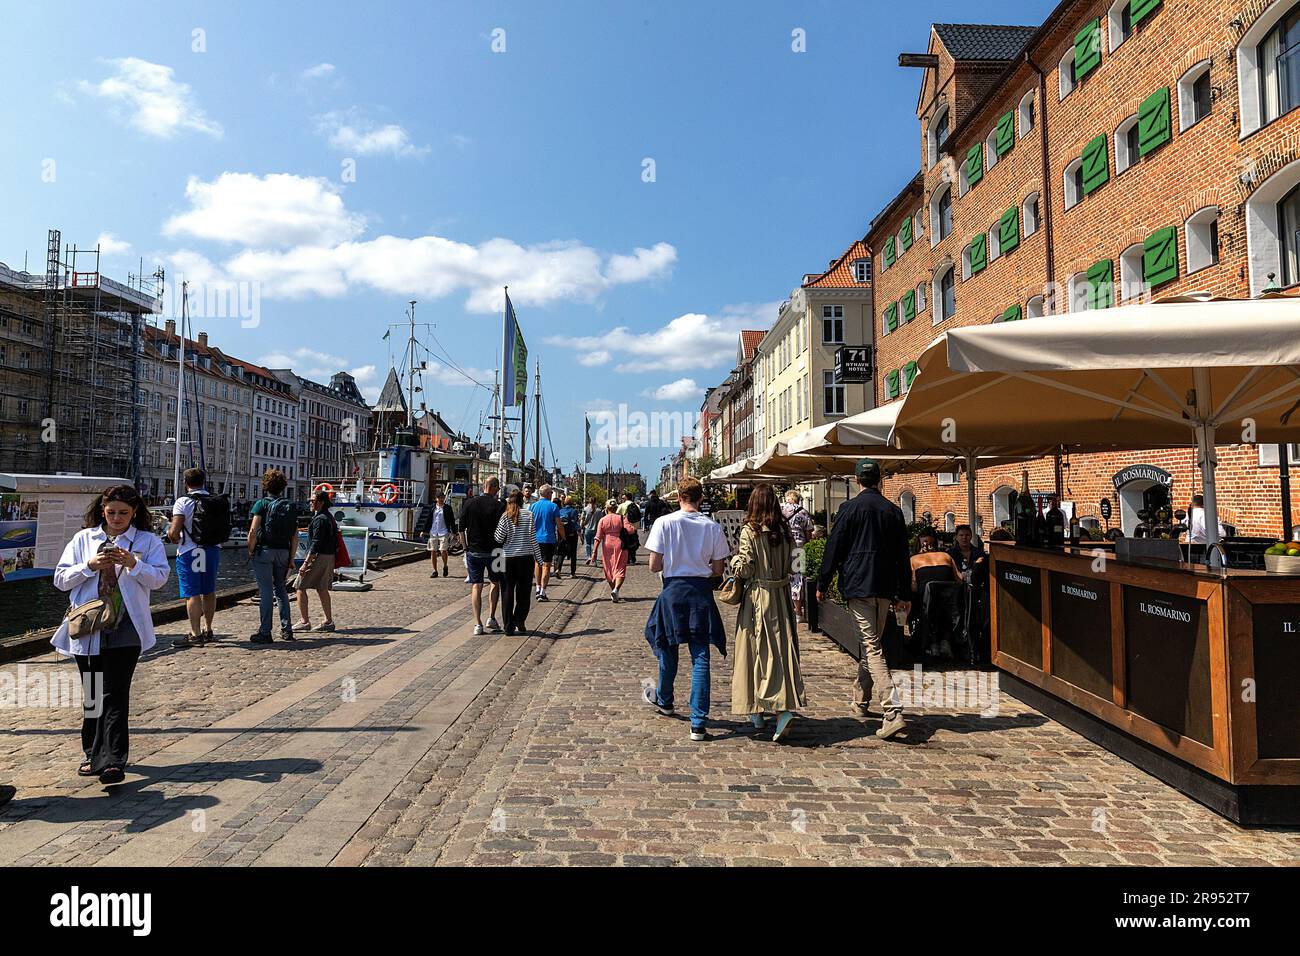 COPENHAGEN: The popular tourist area, the wharf of Nyhavn, seen on June 4, 2023 in Copenhagen, Denmark. To the right is the hotel, Nyhavn 71, which is Stock Photo